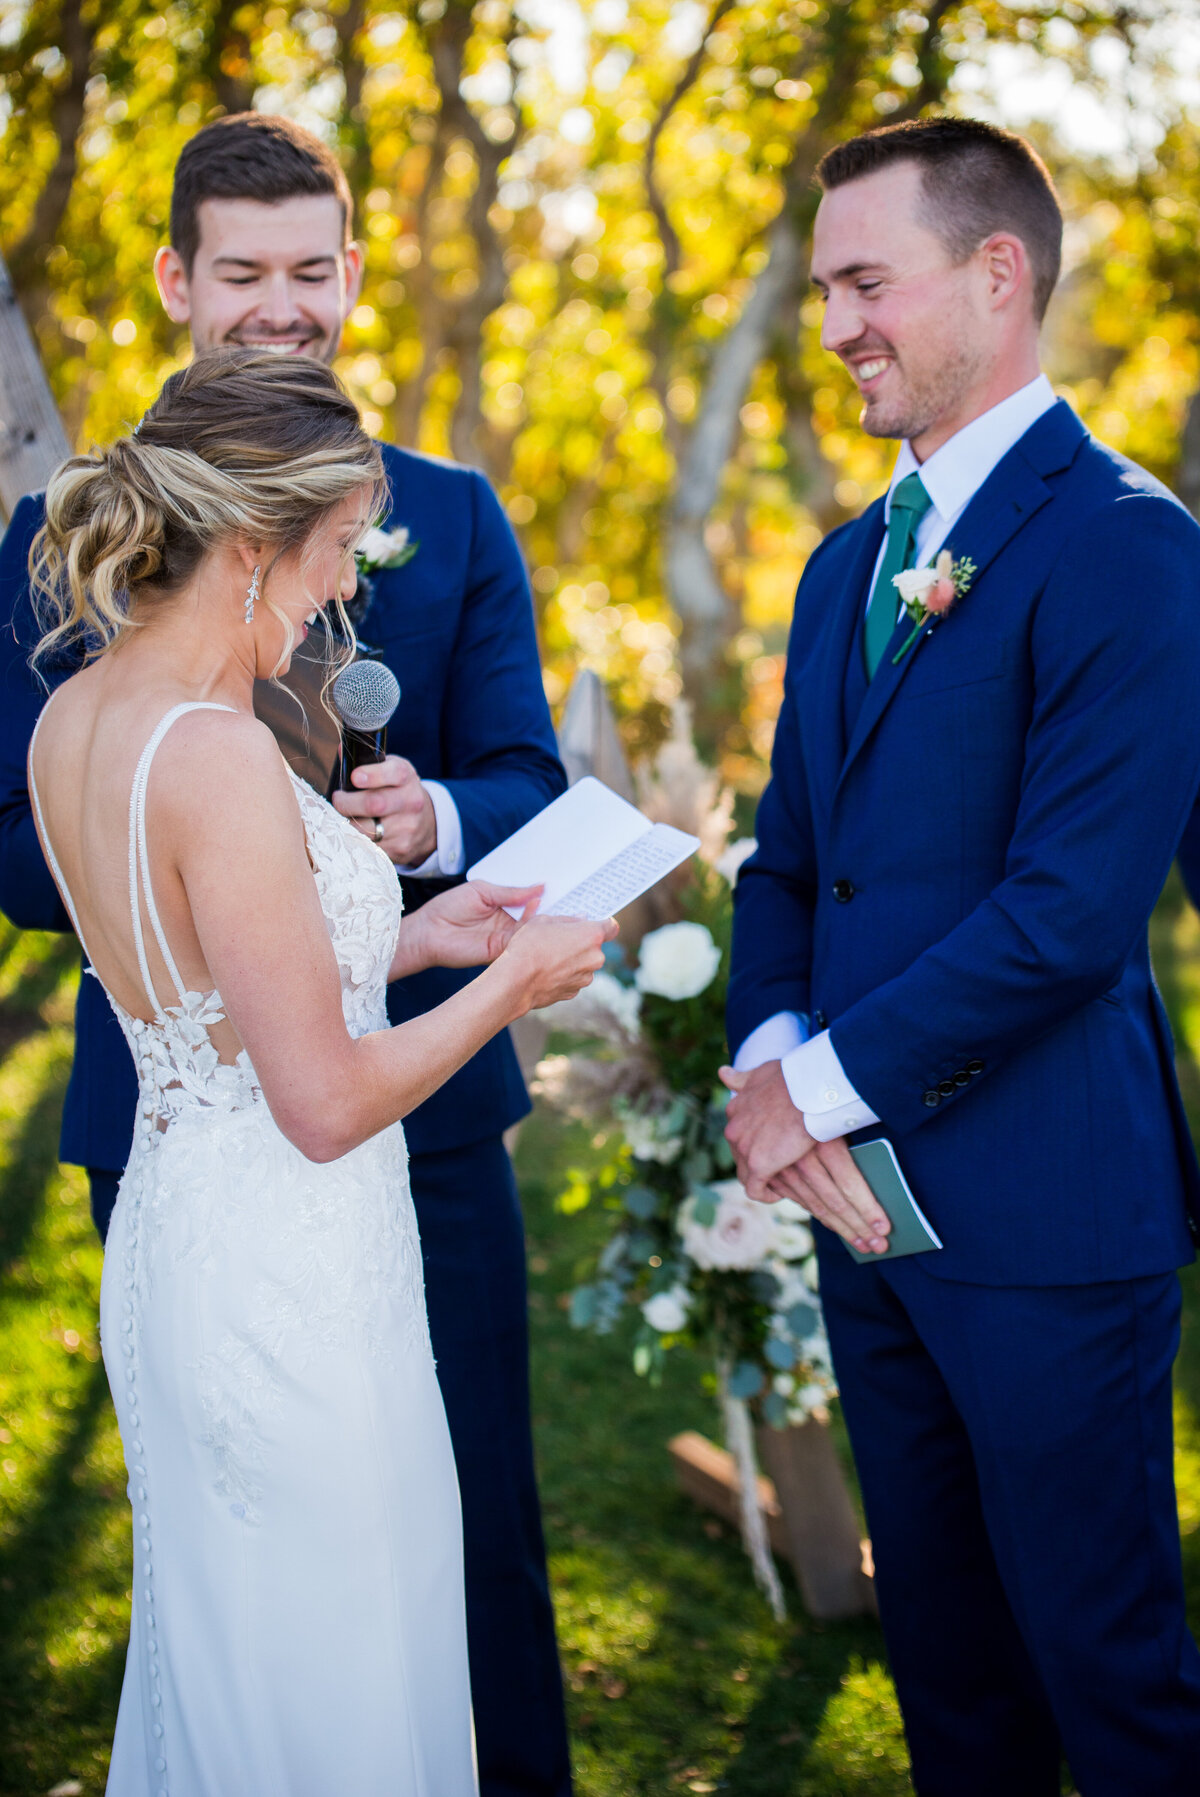 A bride reads her vows to her smiling groom during their ceremony at The Oaks at Plum Creek.